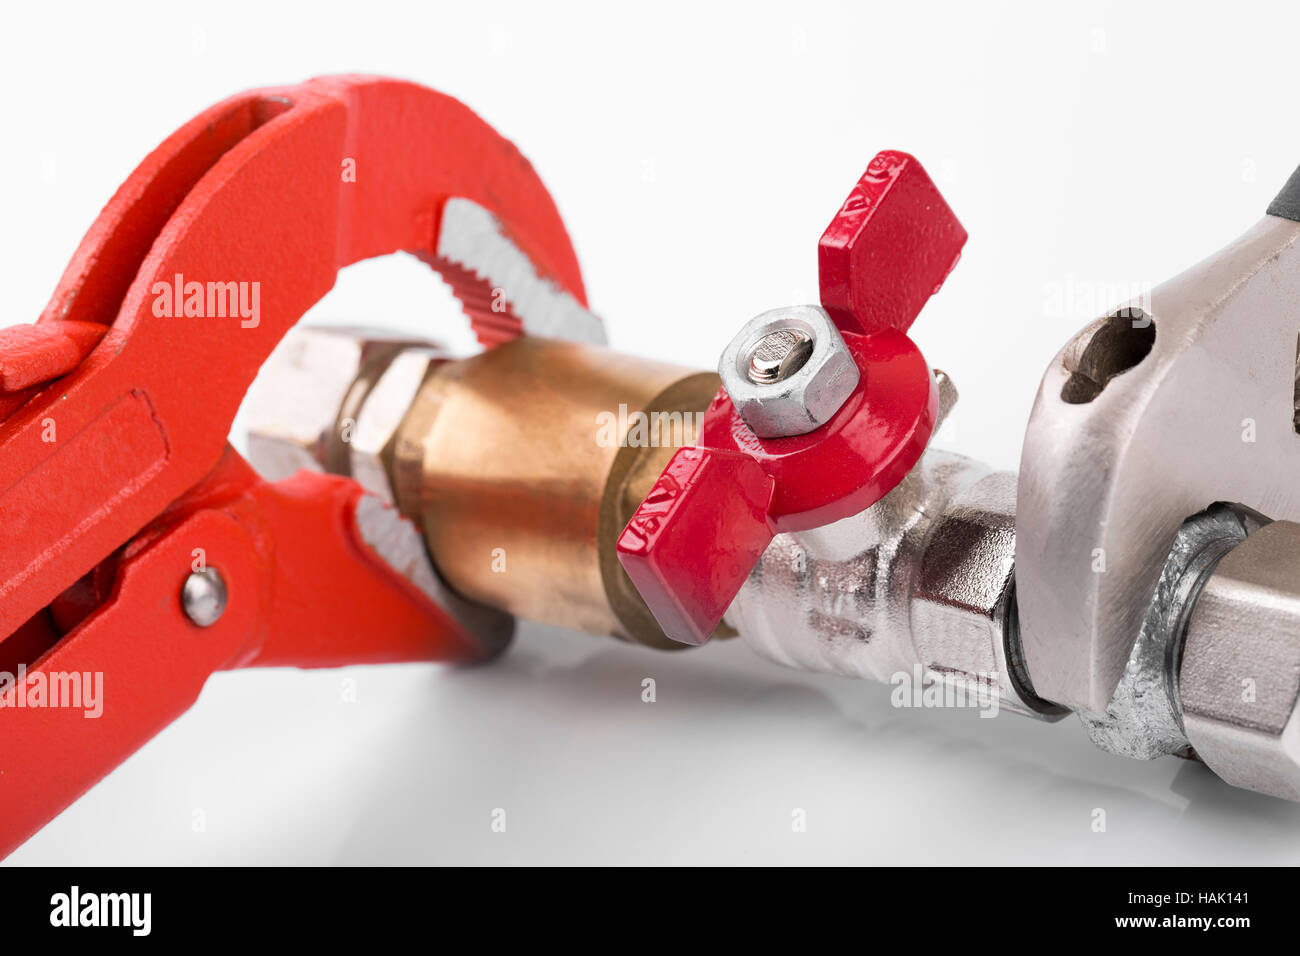 closeup of plumbing valve connection and pipe wrench Stock Photo